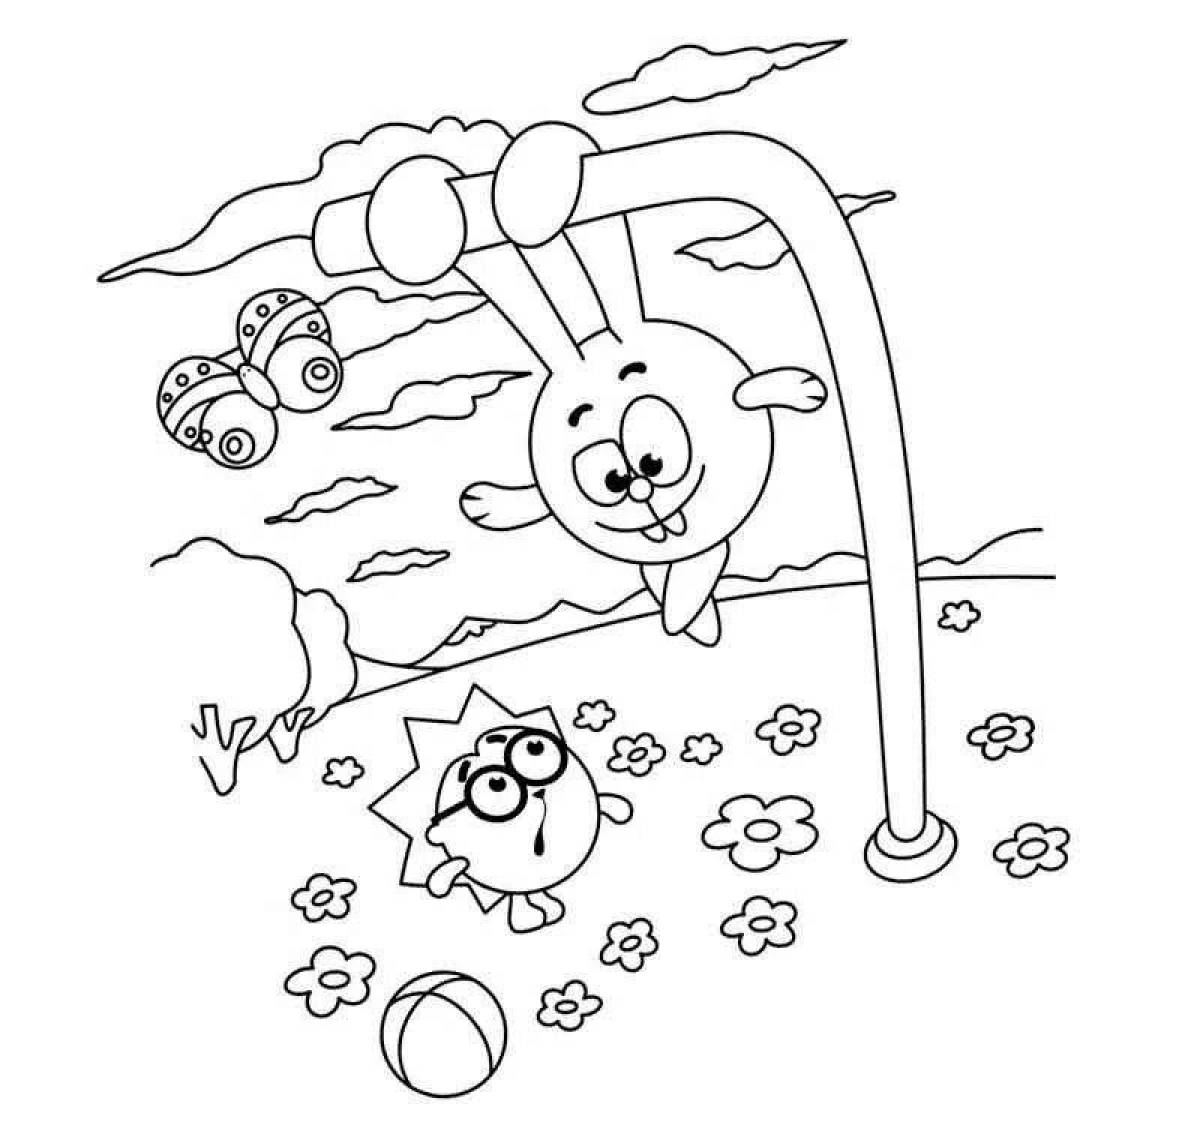 Color-frenzy crumbleing coloring page